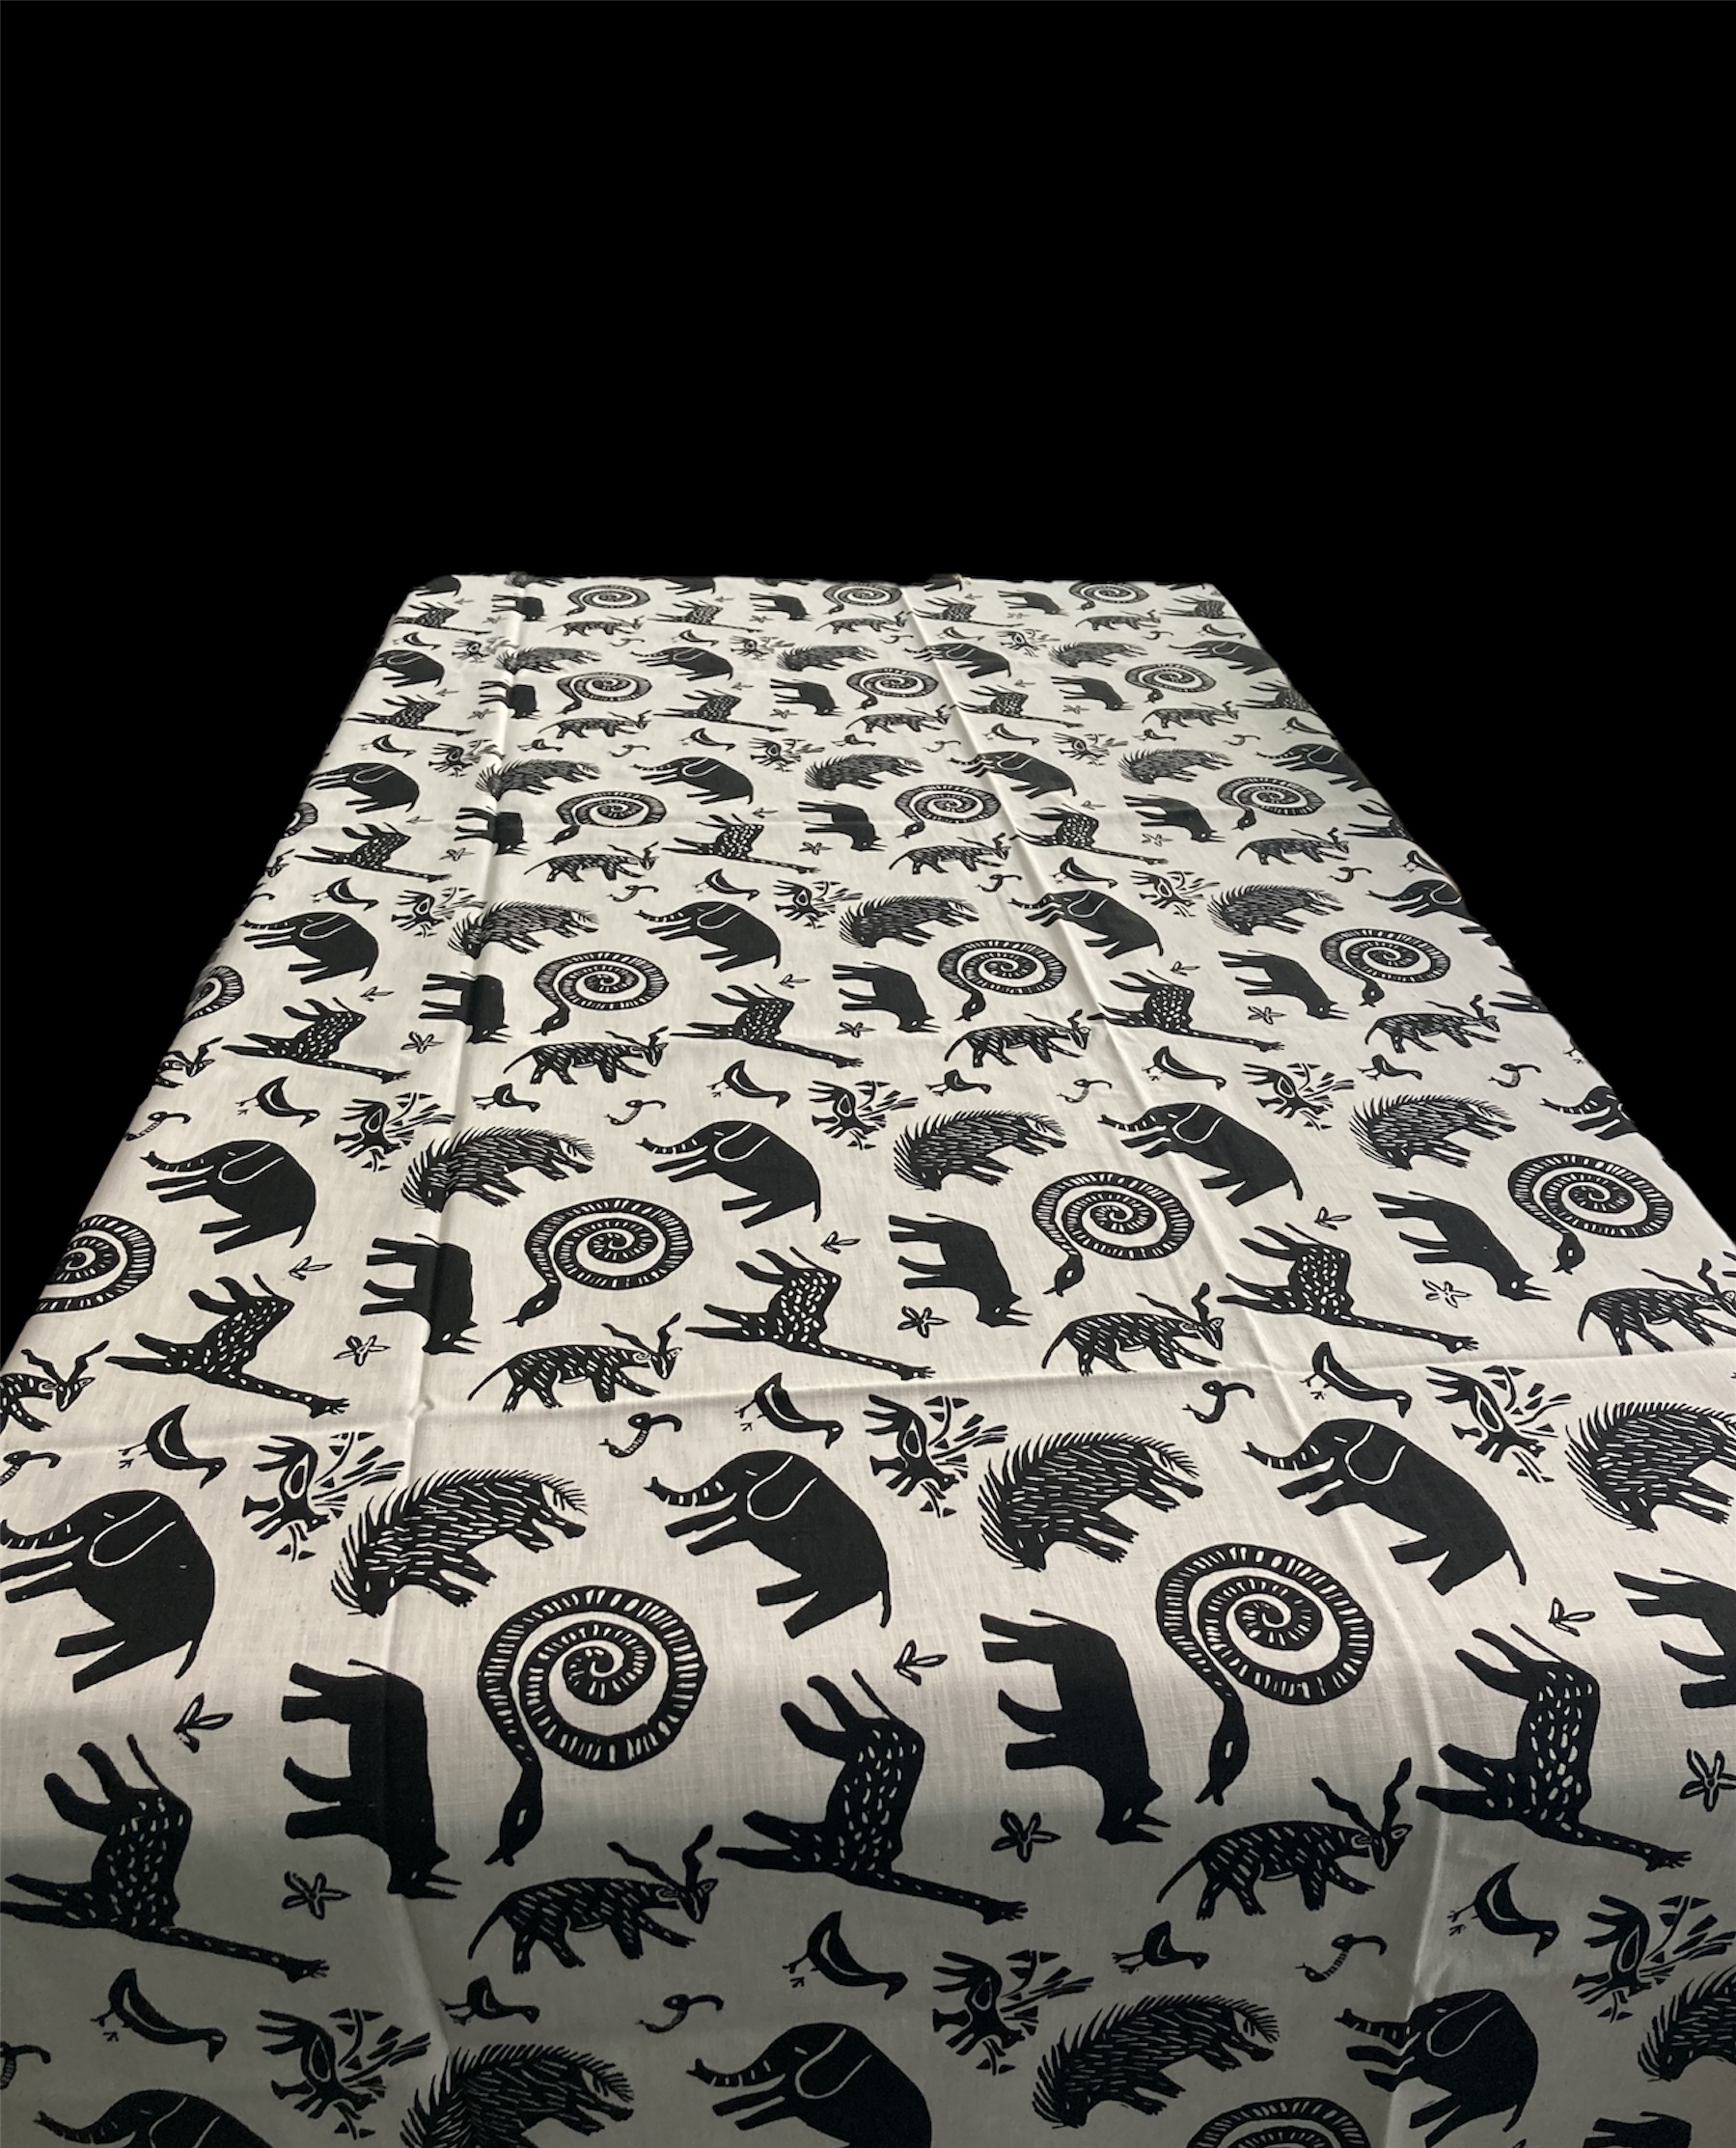 100% cotton Tablecloth approx. 98" x 57" from Namibia - # bw03t